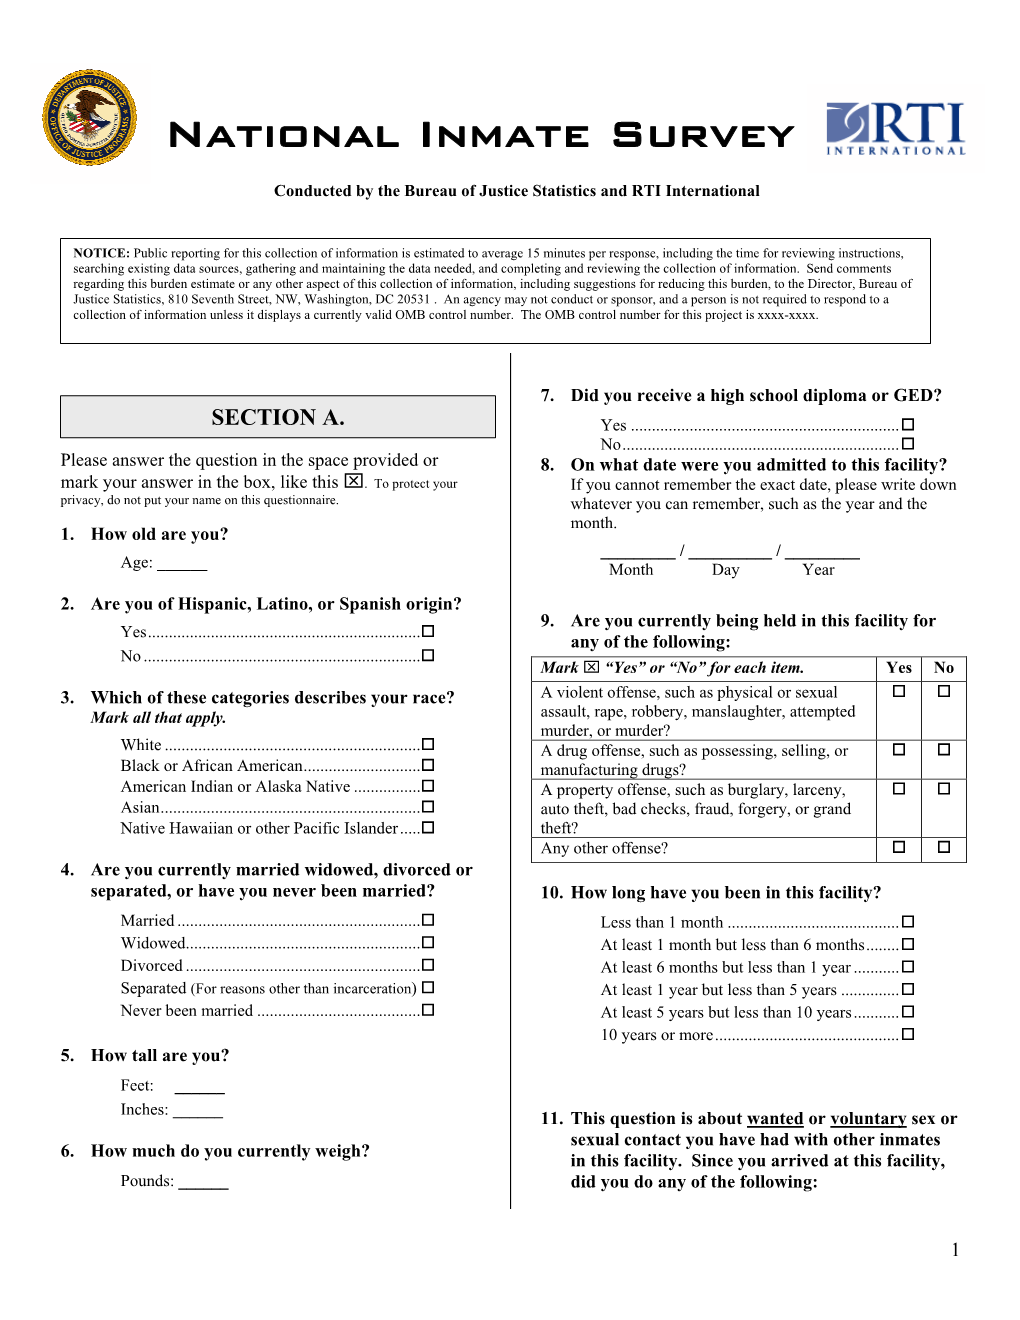 National Inmate Survey